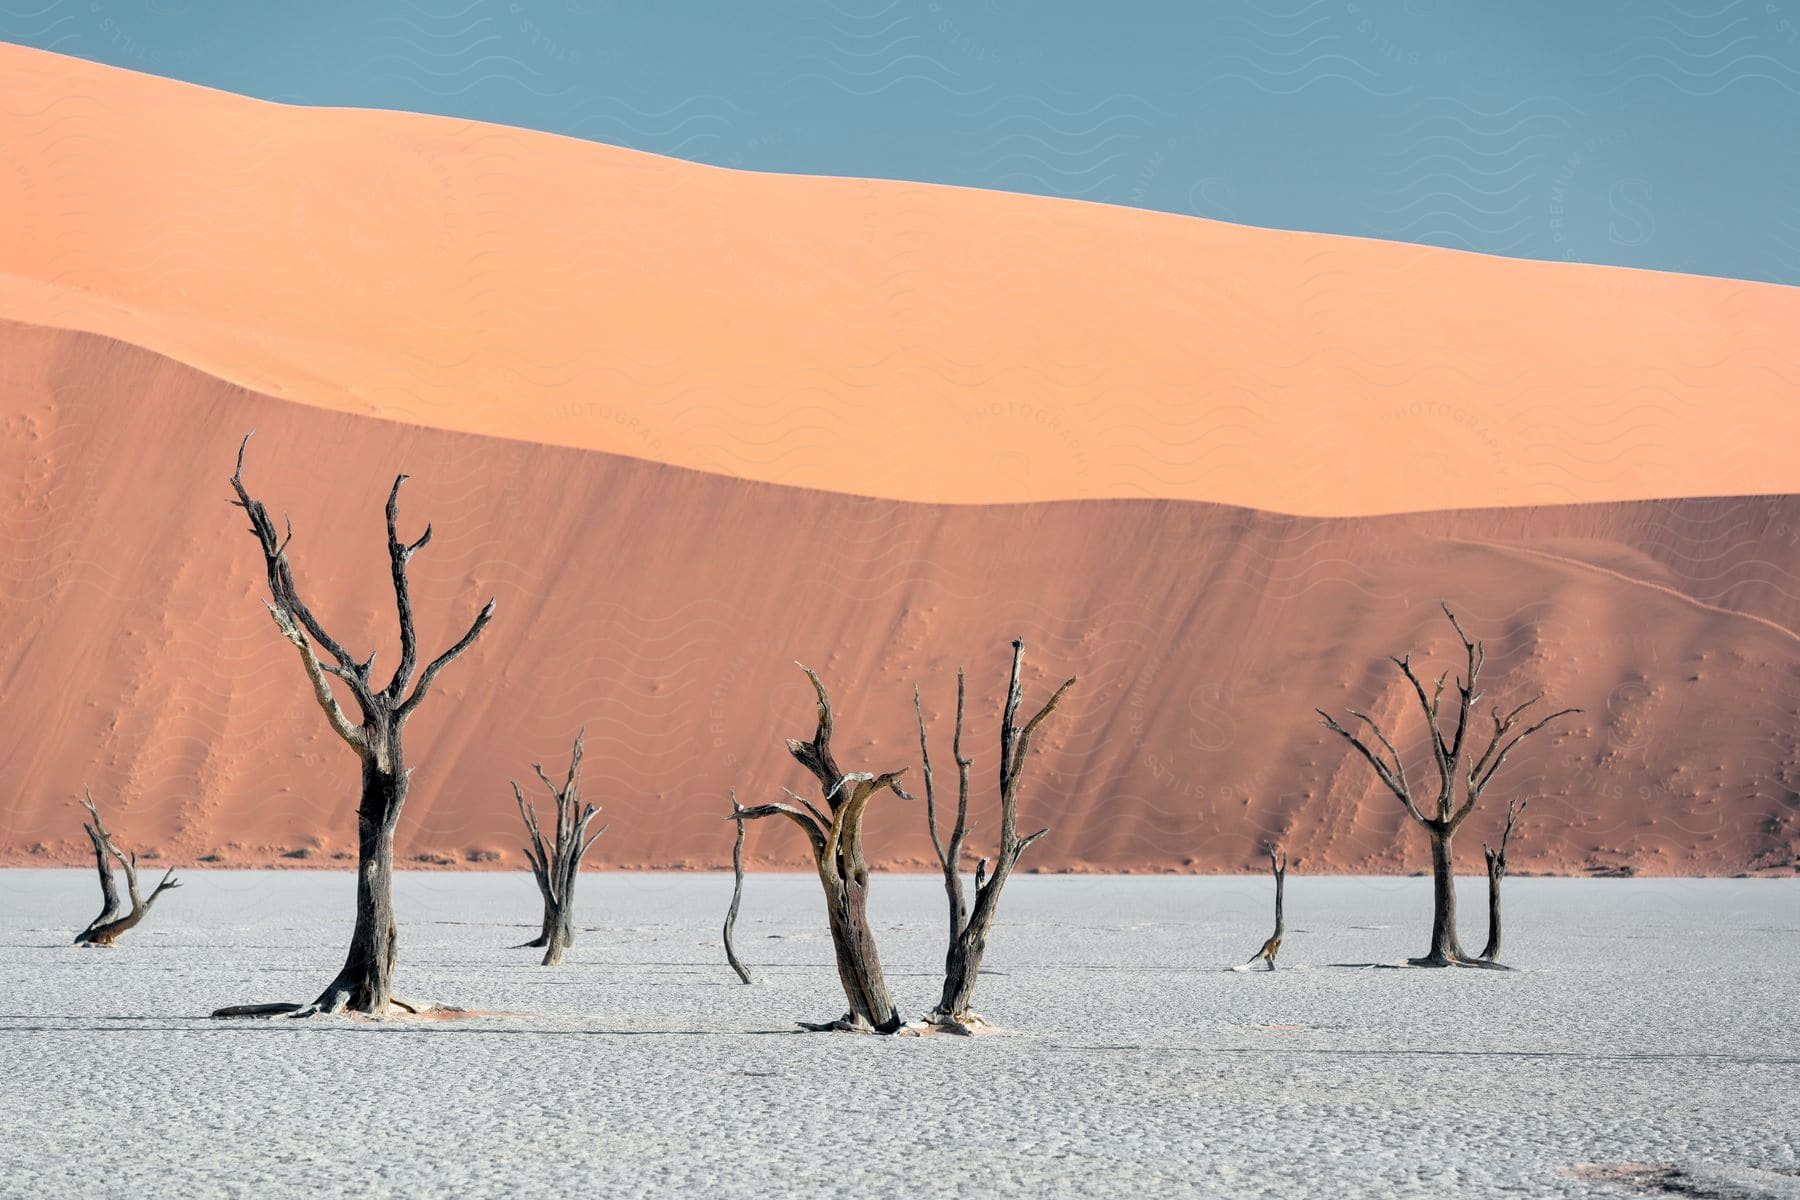 Stock photo of dry trees in a flat desert with dunes in the background